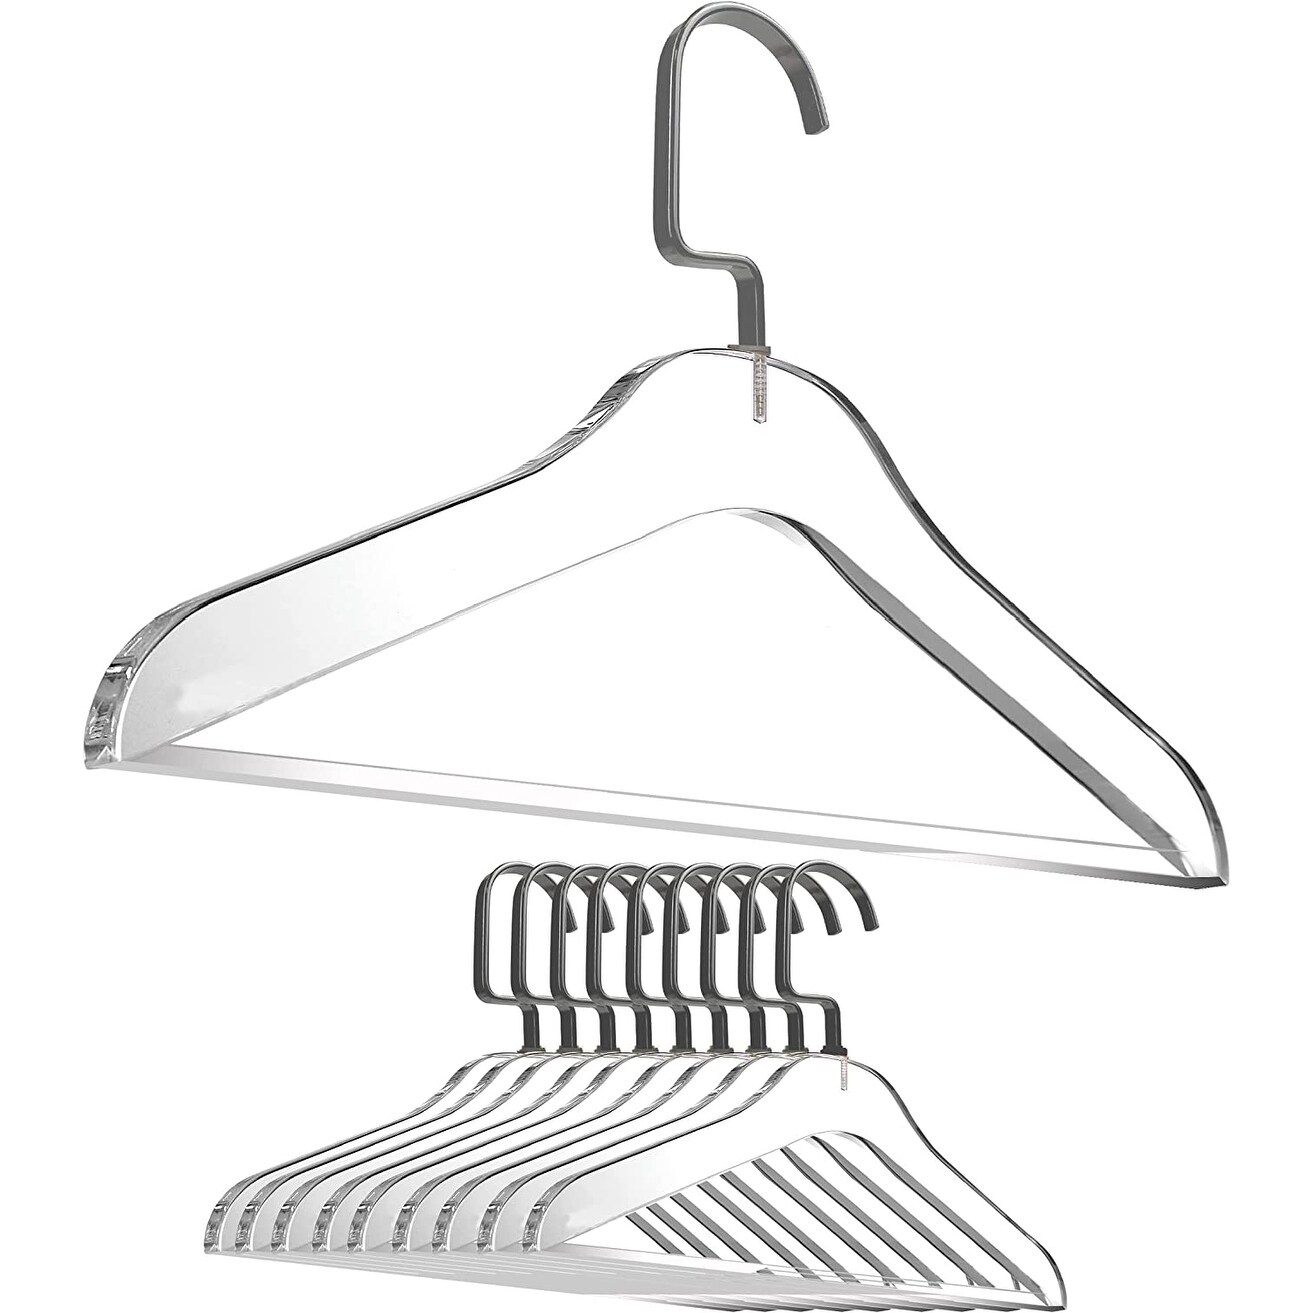 https://ak1.ostkcdn.com/images/products/is/images/direct/3f7a741d9c8e465900f8f80fc564db4bacd381ed/DesignStyles-Clear-Acrylic-Clothes-Hangers-w-Pants-Bar---10-Pk.jpg